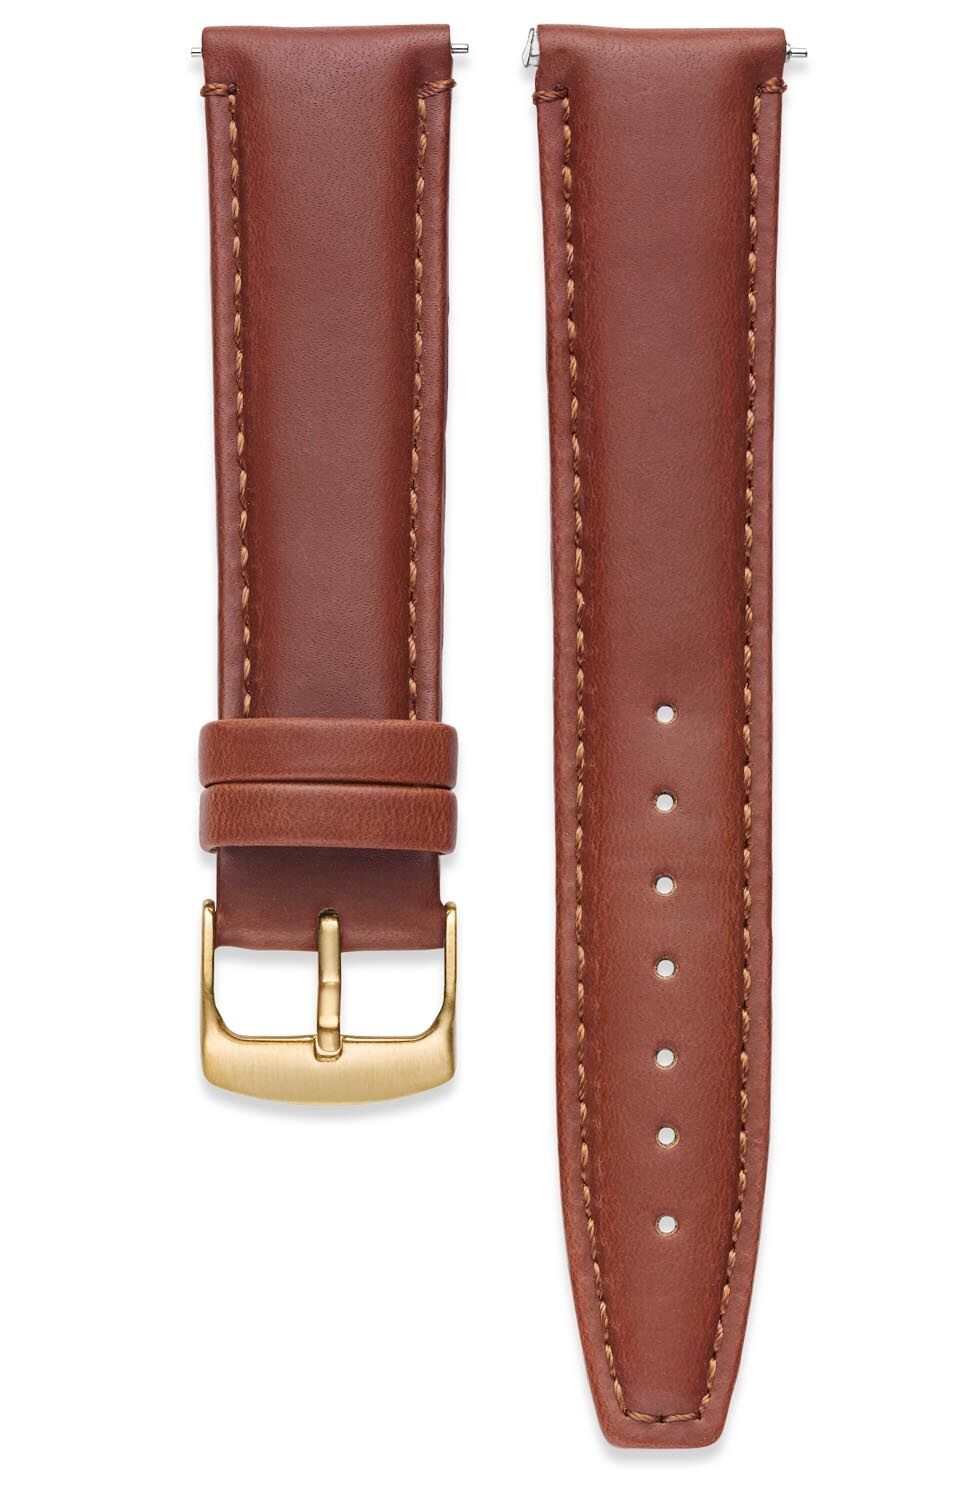 IHS 20mm Leather 77.08.20 IPG Buckle